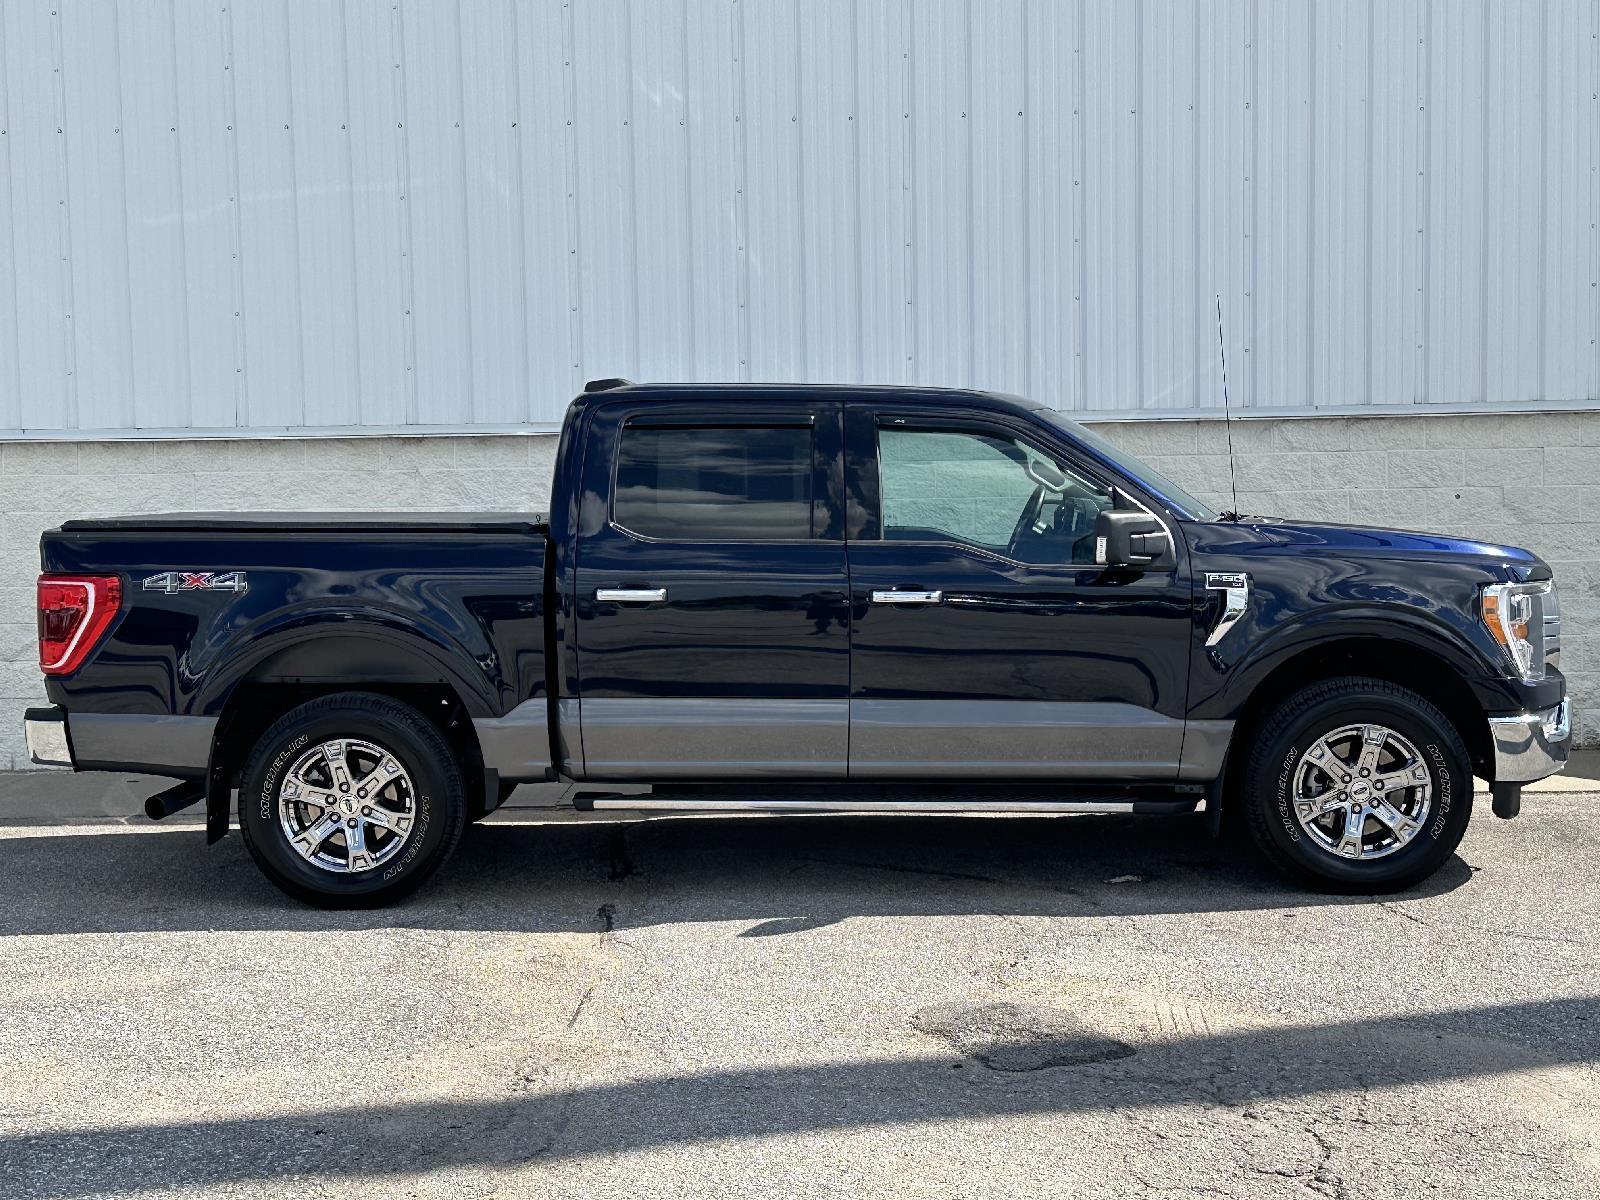 Used 2021 Ford F-150 XLT Crew Cab Truck for sale in Lincoln NE